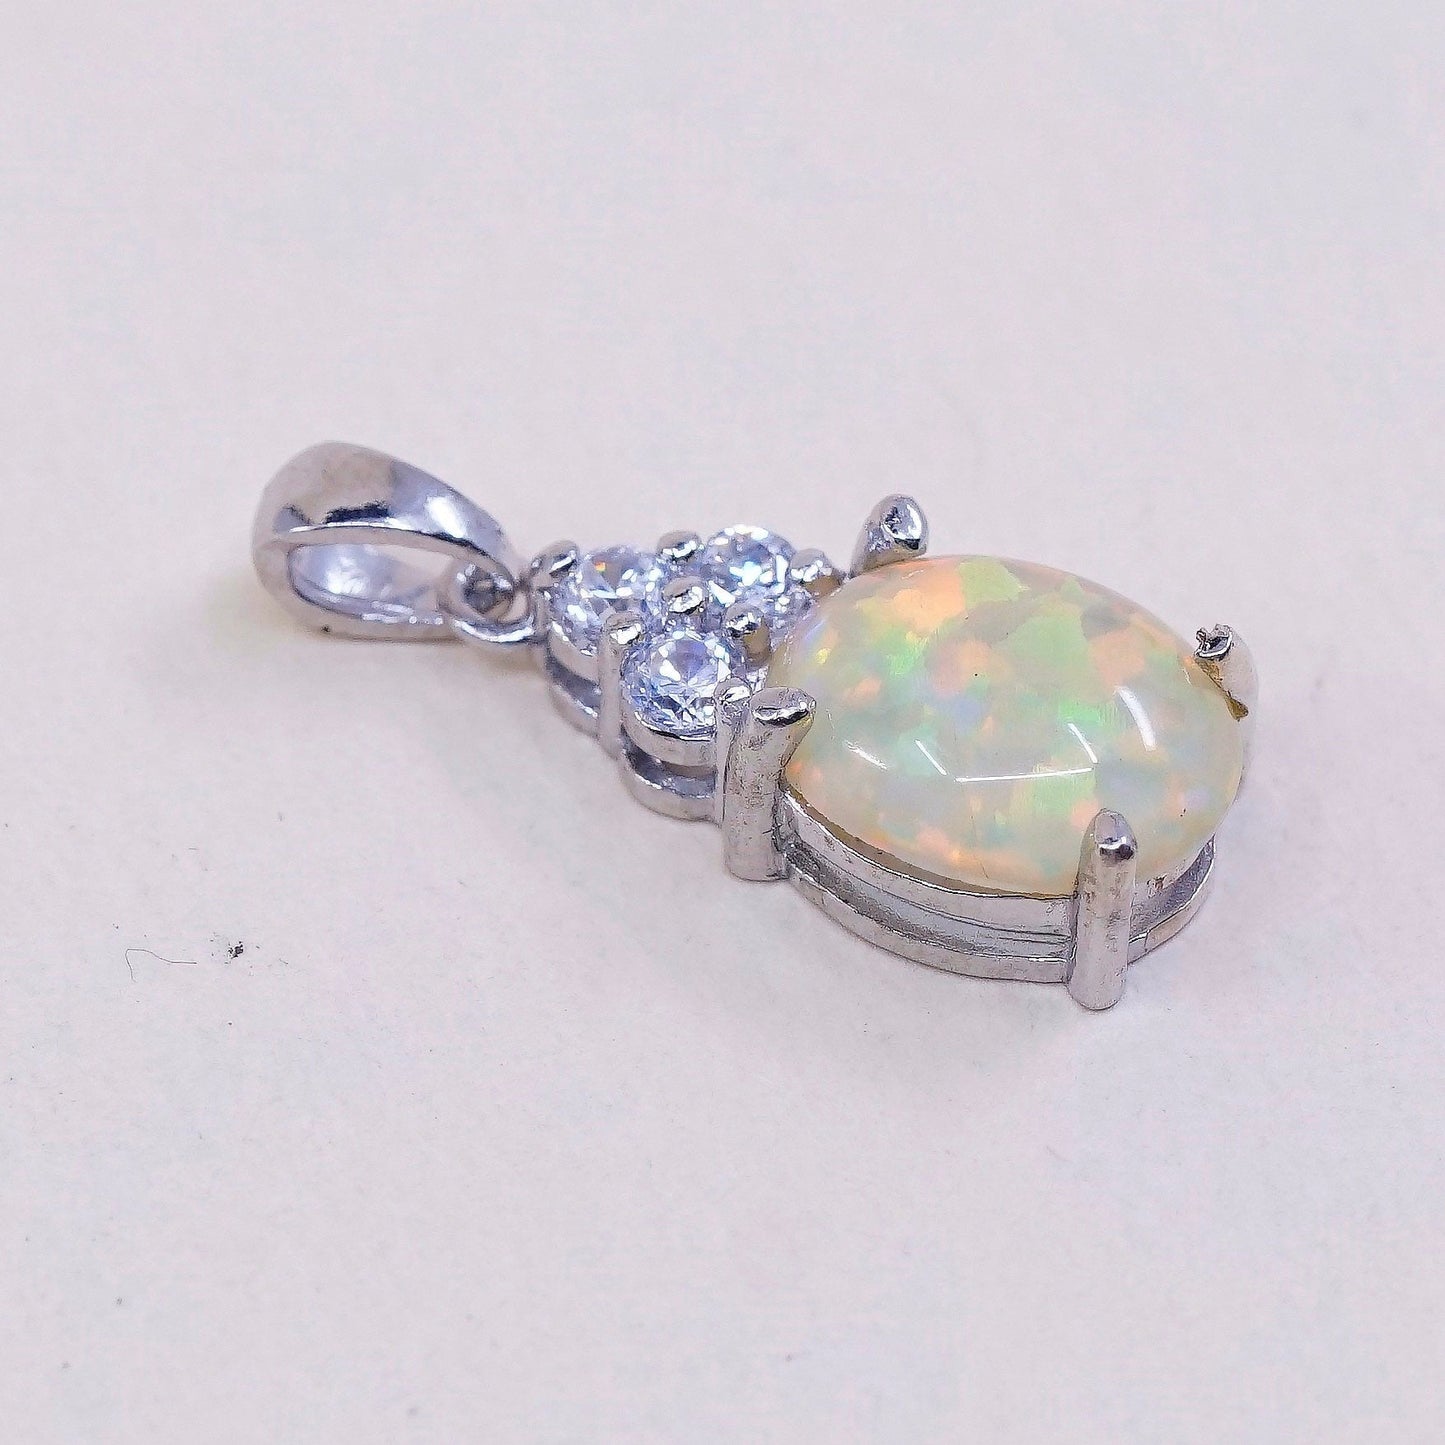 VTG Sterling silver handmade pendant, solid 925 silver with opal